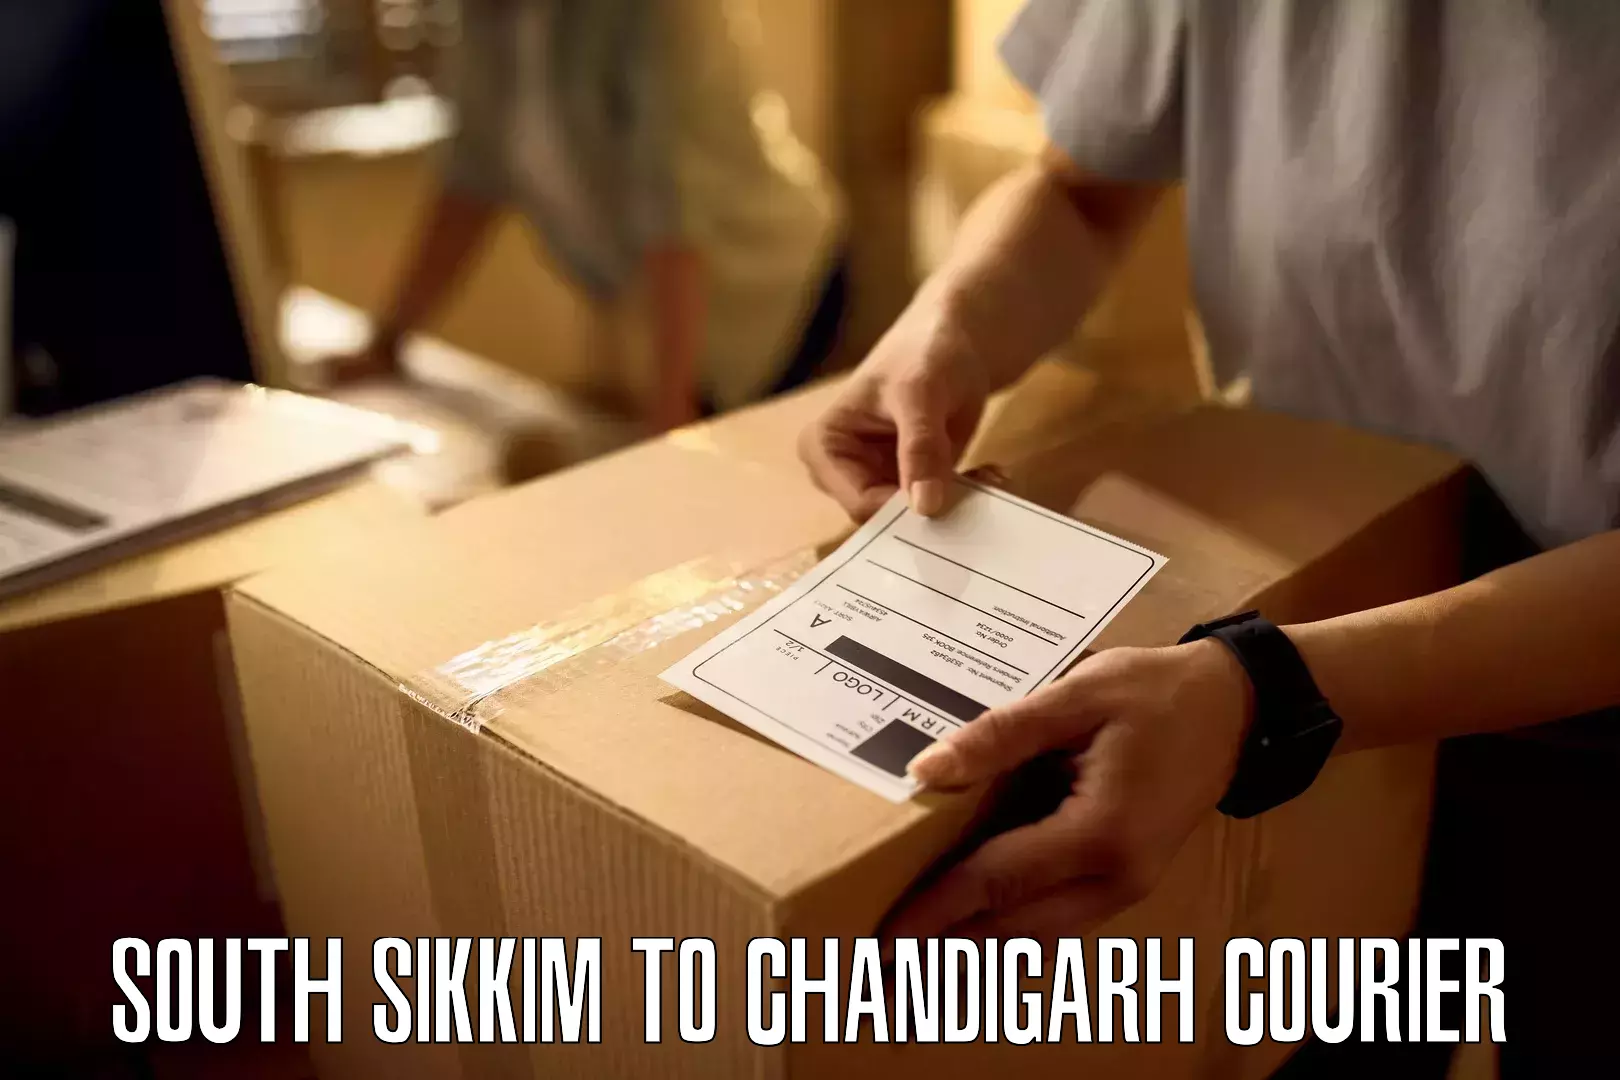 Domestic courier South Sikkim to Chandigarh